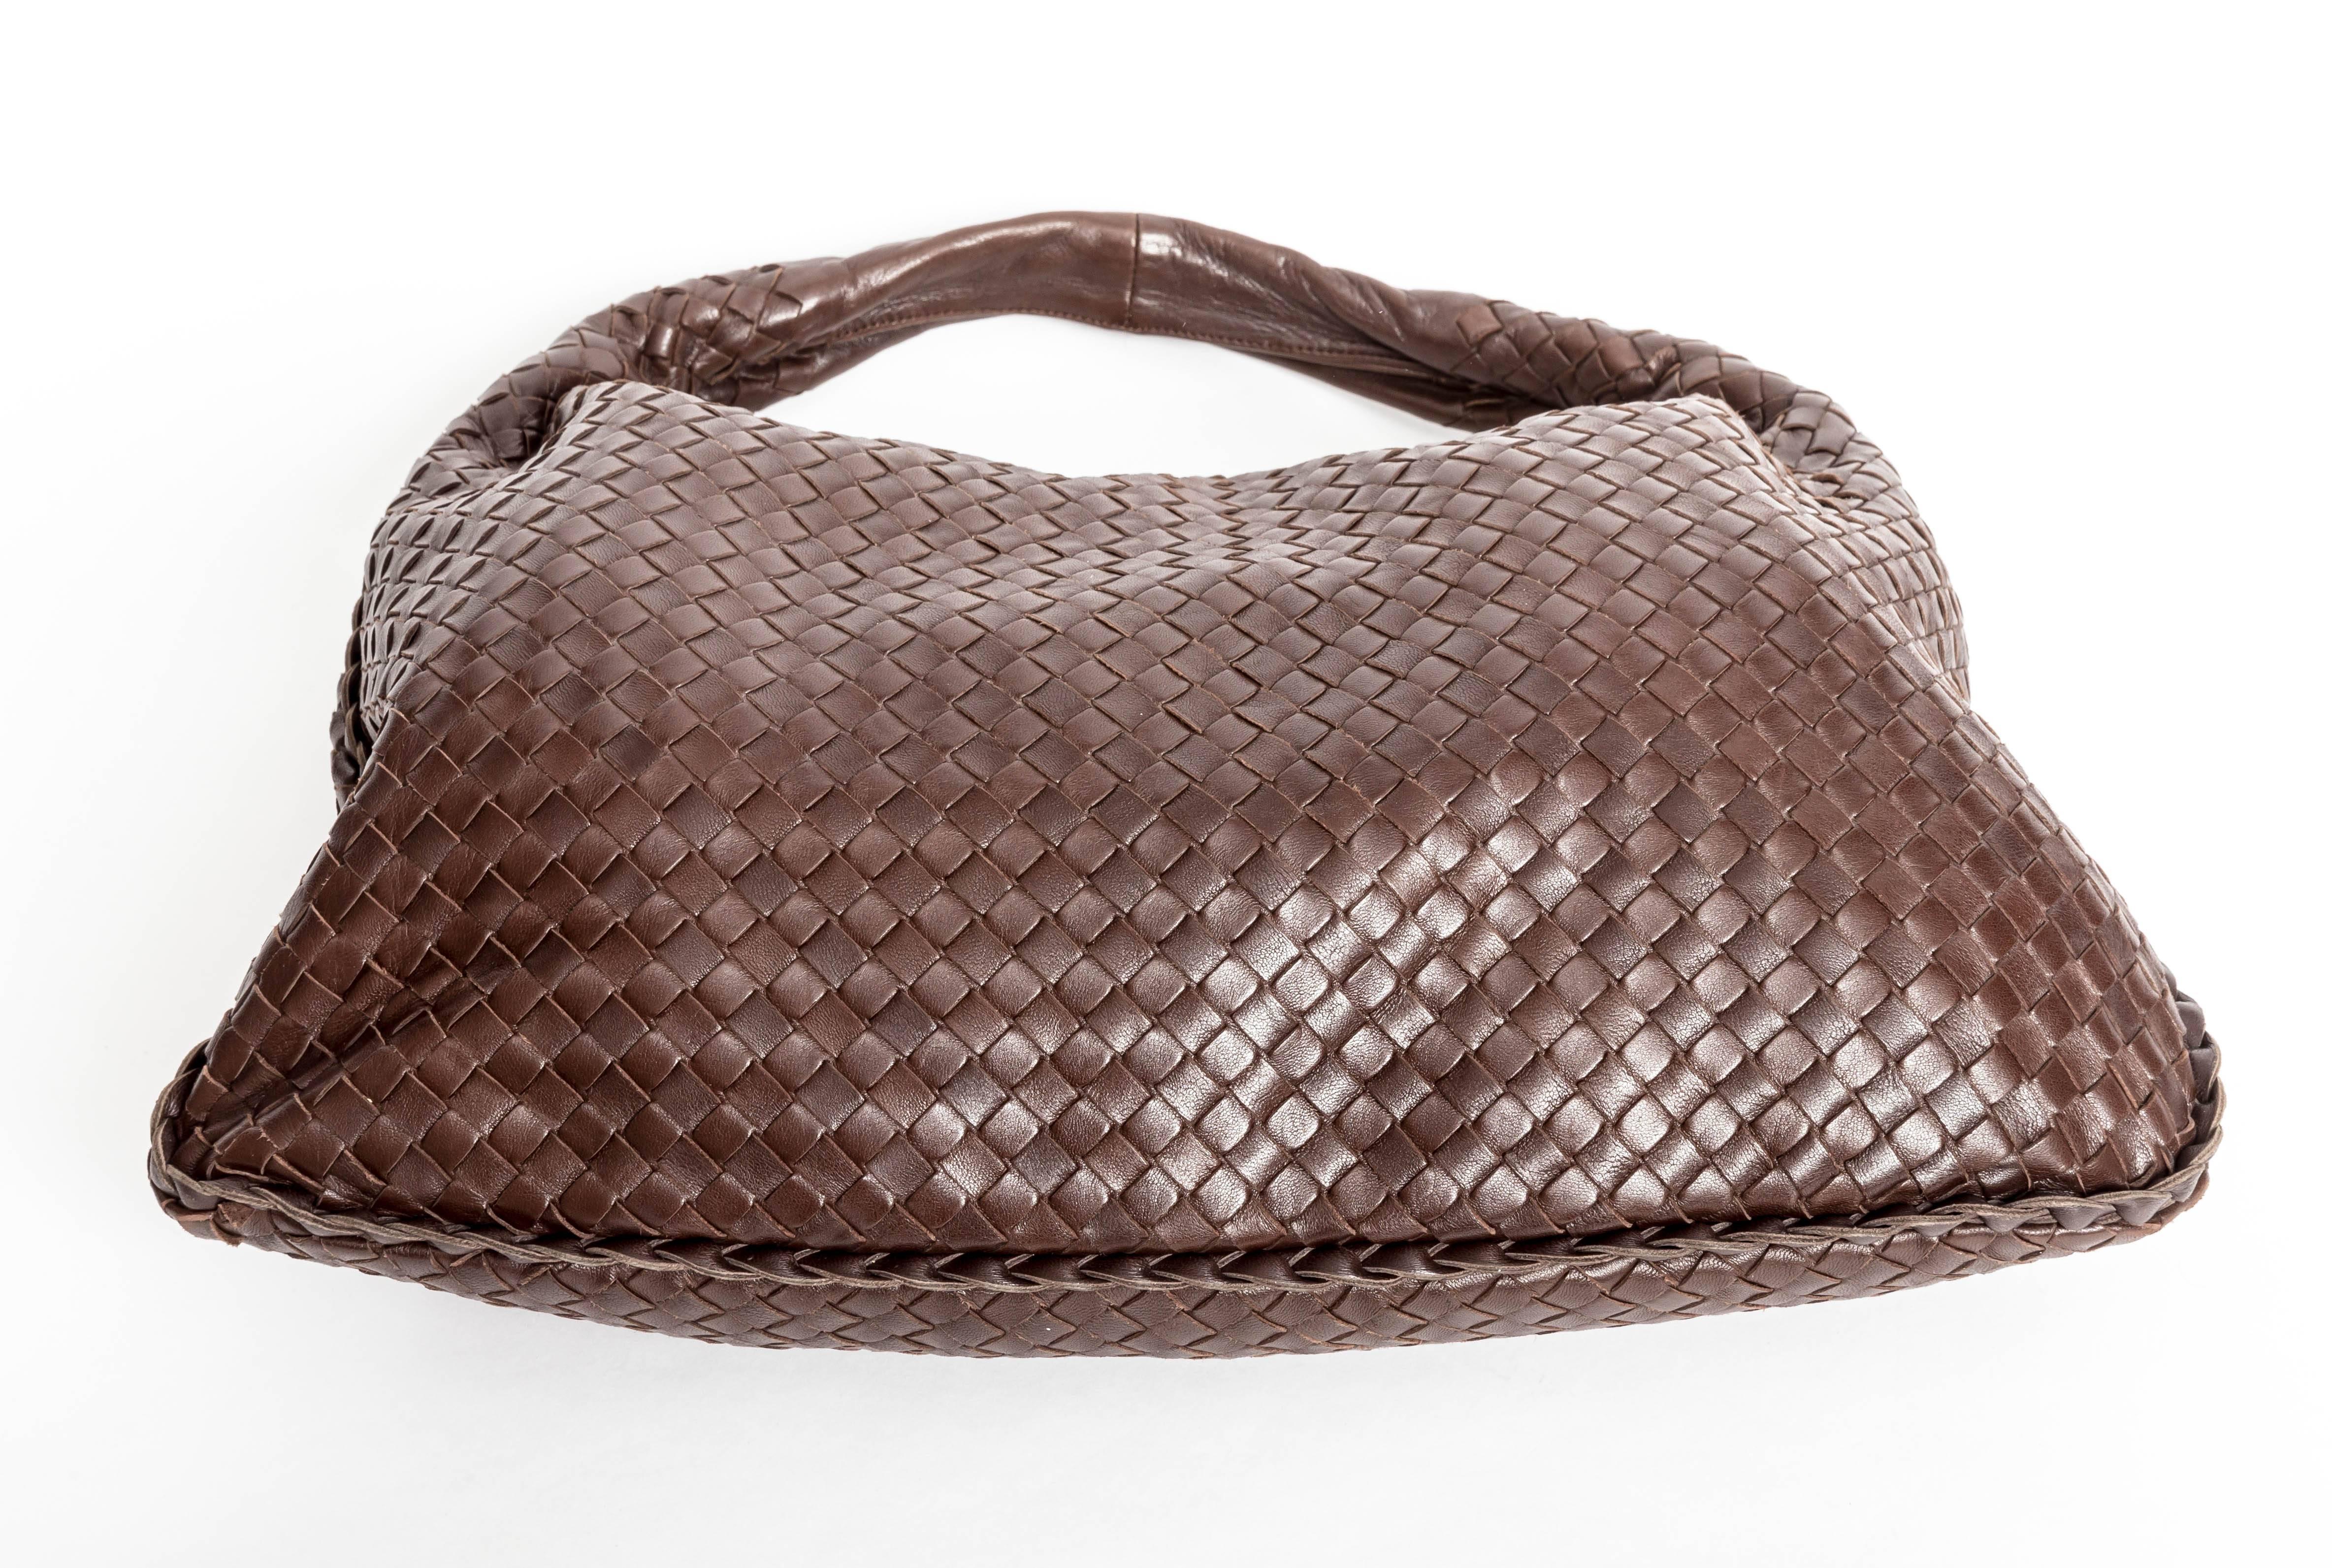 Beautiful Bottega Veneta Hobo in Brown Leather.
Dust Bag is included.
Condition is excellent.
Strap Drop 4.5 inches.